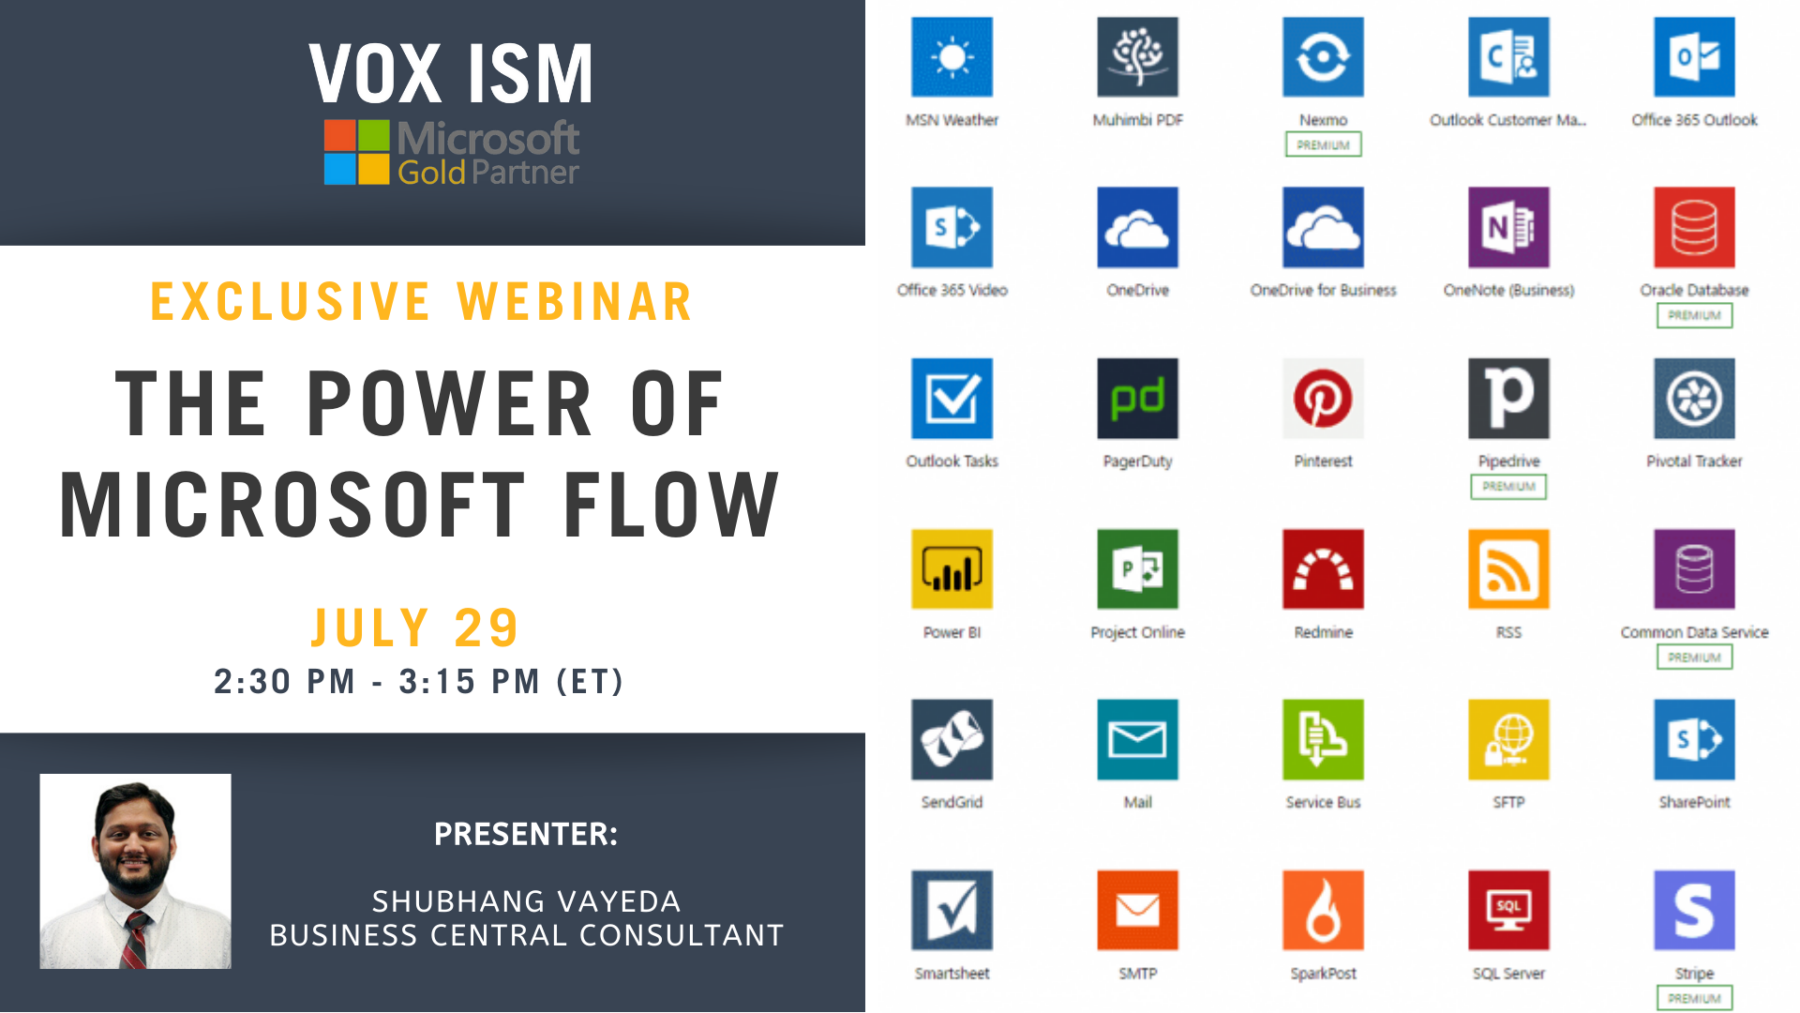 The Power of Microsoft Flow_VOX ISM